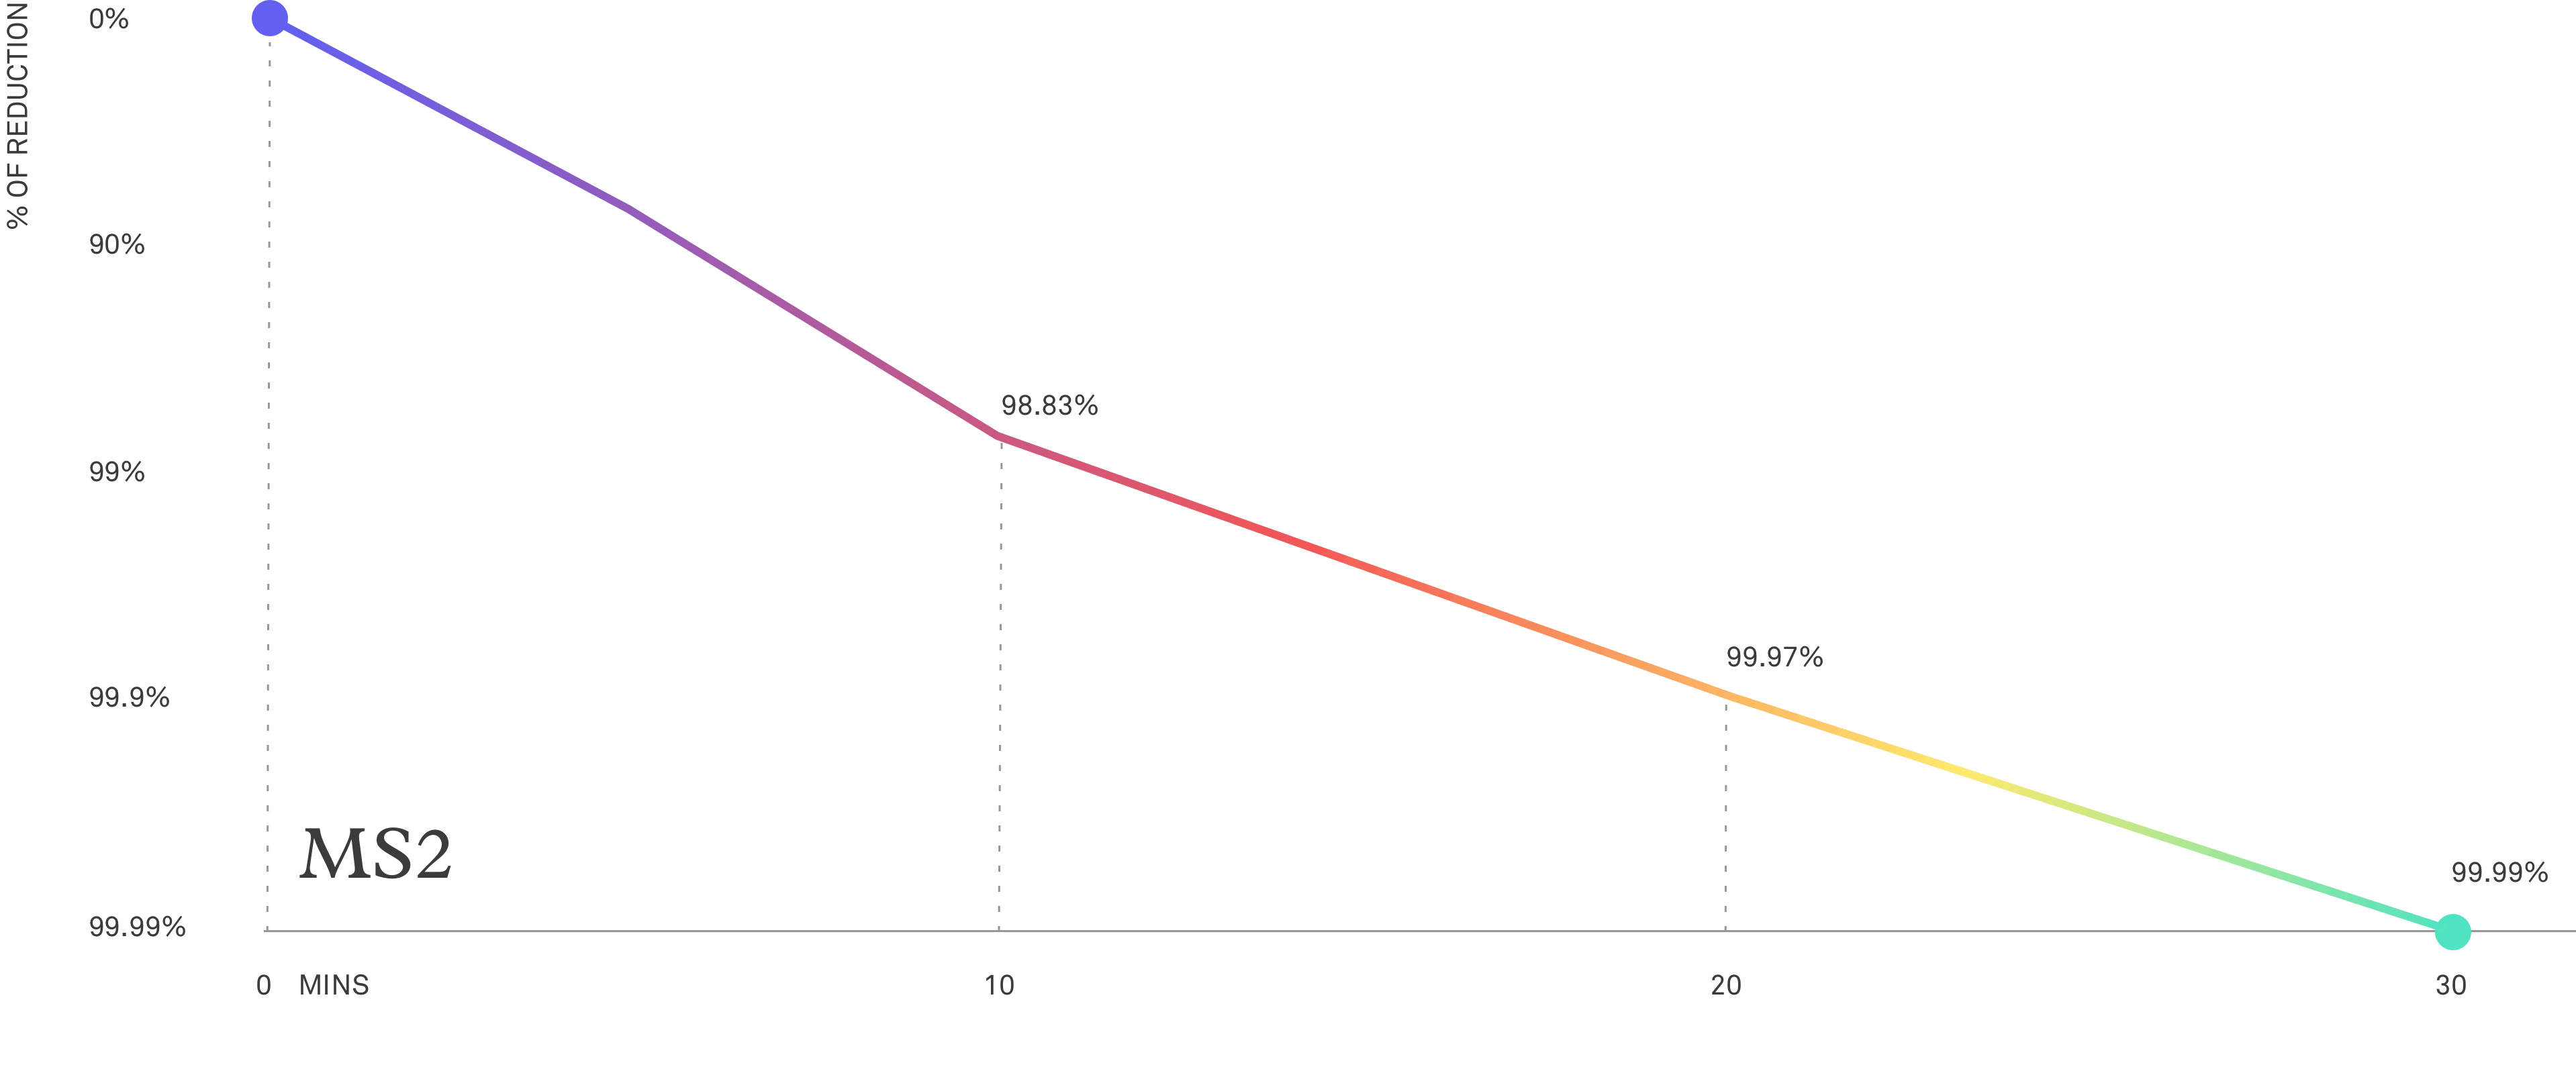 MS2 reduction over time | Molekule